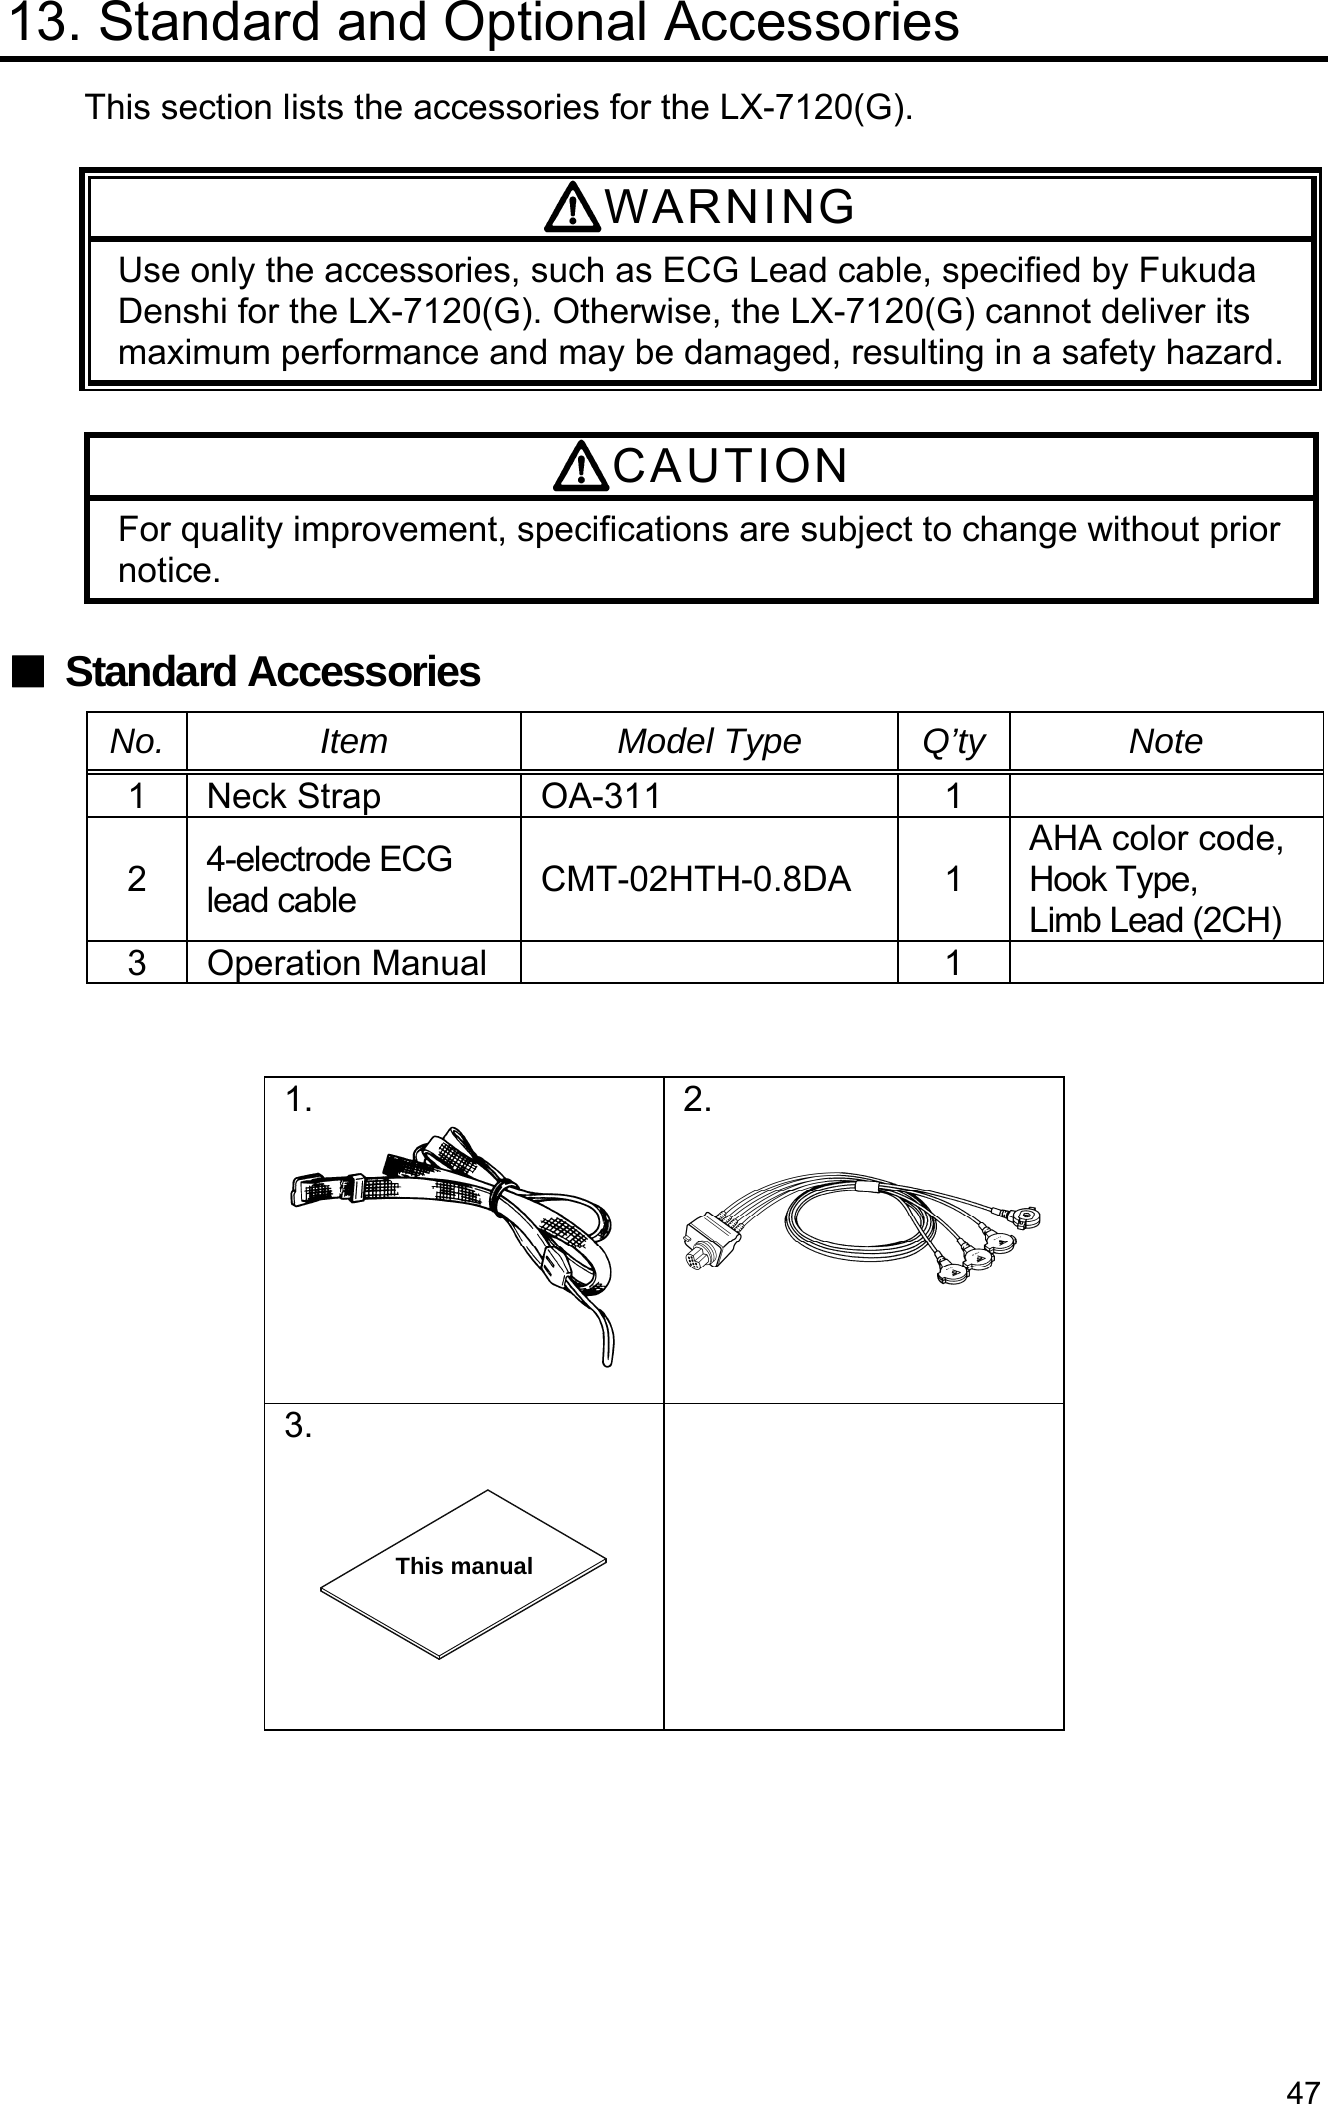  47 13. Standard and Optional Accessories This section lists the accessories for the LX-7120(G).  WARNING Use only the accessories, such as ECG Lead cable, specified by Fukuda Denshi for the LX-7120(G). Otherwise, the LX-7120(G) cannot deliver its maximum performance and may be damaged, resulting in a safety hazard. CAUTION For quality improvement, specifications are subject to change without prior notice.  ■ Standard Accessories No. Item  Model Type Q’ty Note 1 Neck Strap OA-311 12  4-electrode ECG lead cable  CMT-02HTH-0.8DA 1 AHA color code, Hook Type,     Limb Lead (2CH) 3 Operation Manual   1     1.  2.  3.       This manual